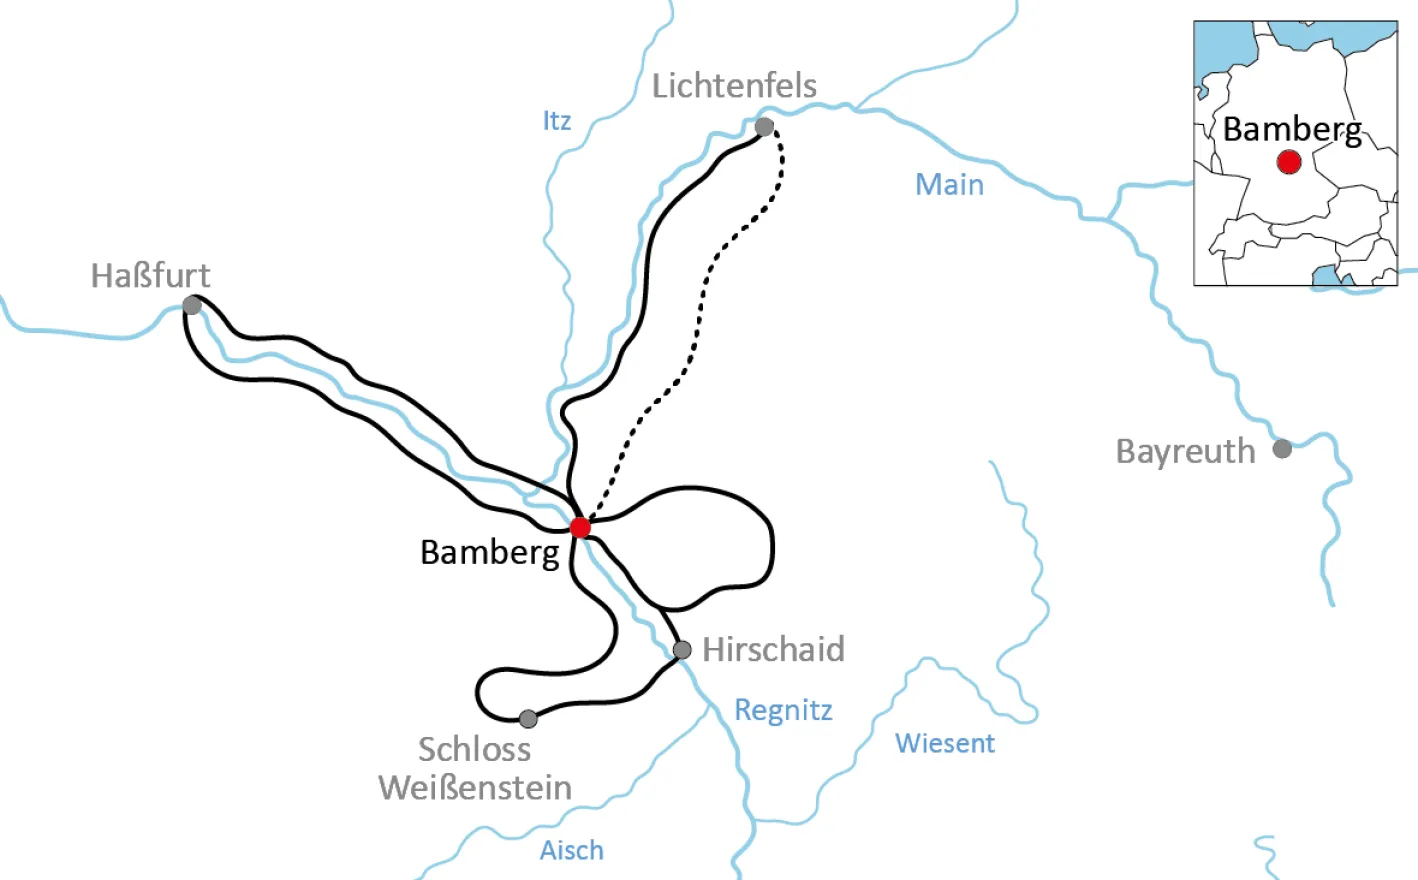 Map for cycling vacation in Bamberg